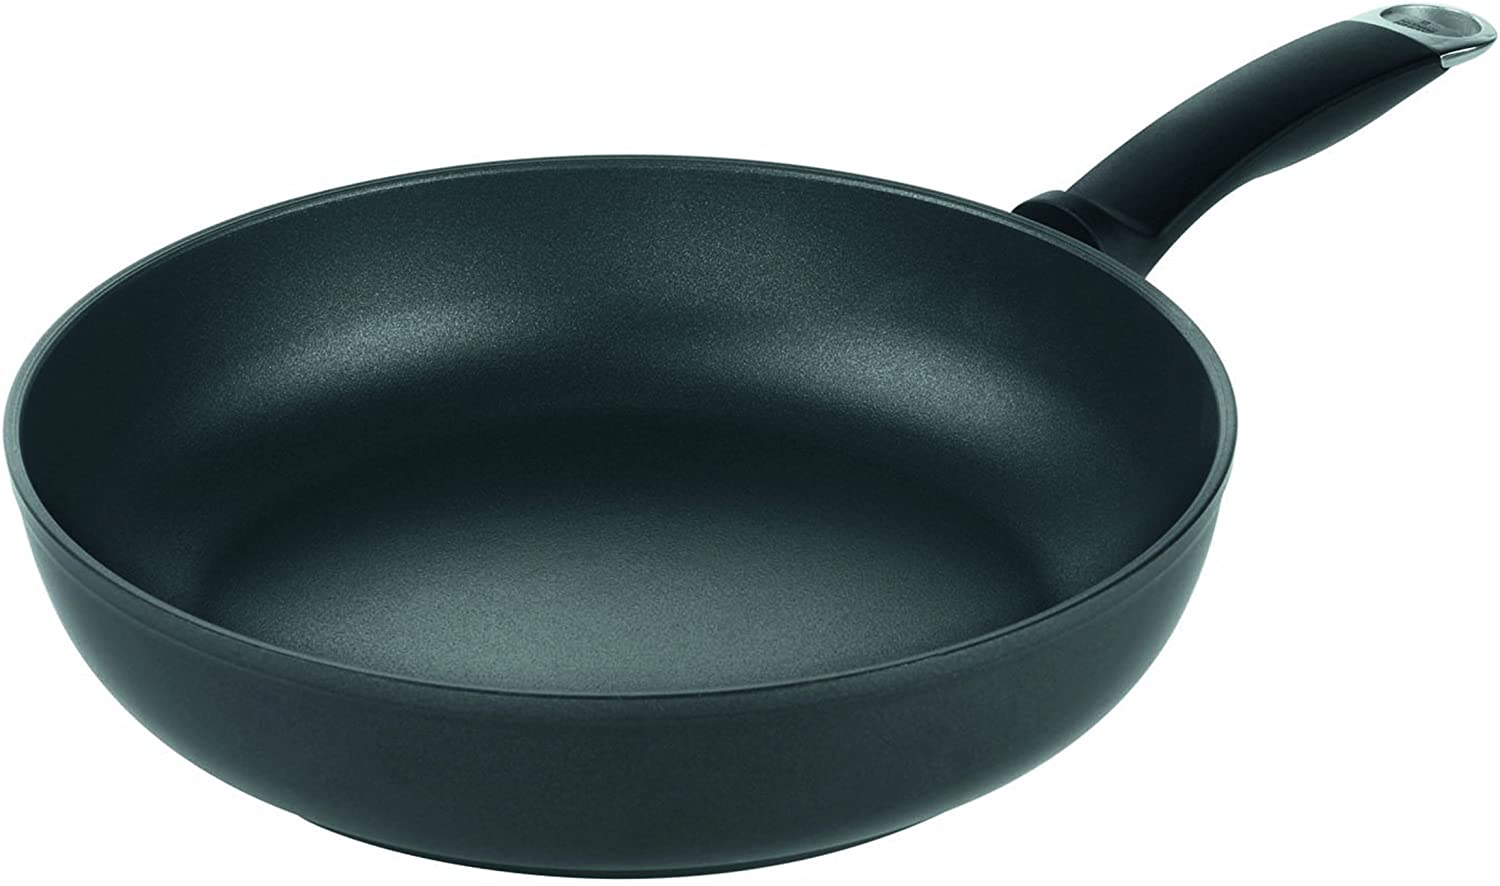 KUHN RIKON 31204 Gourmet Induction Frying Pan 24 cm Non-Stick Coating with Extra High Sides